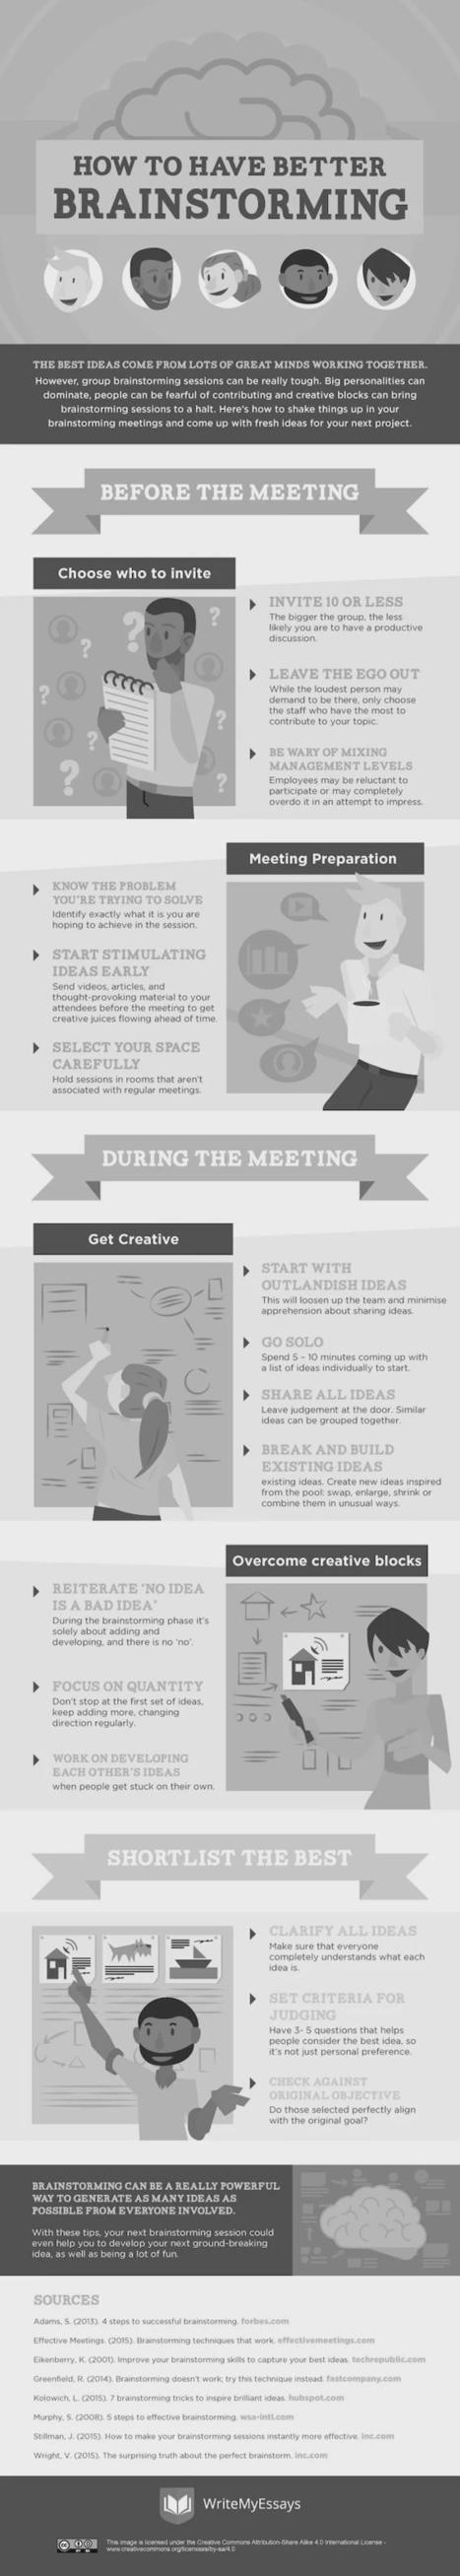 How To Get The Most Out Of Your Meeting | Daily Infographic | Things and Stuff | Scoop.it